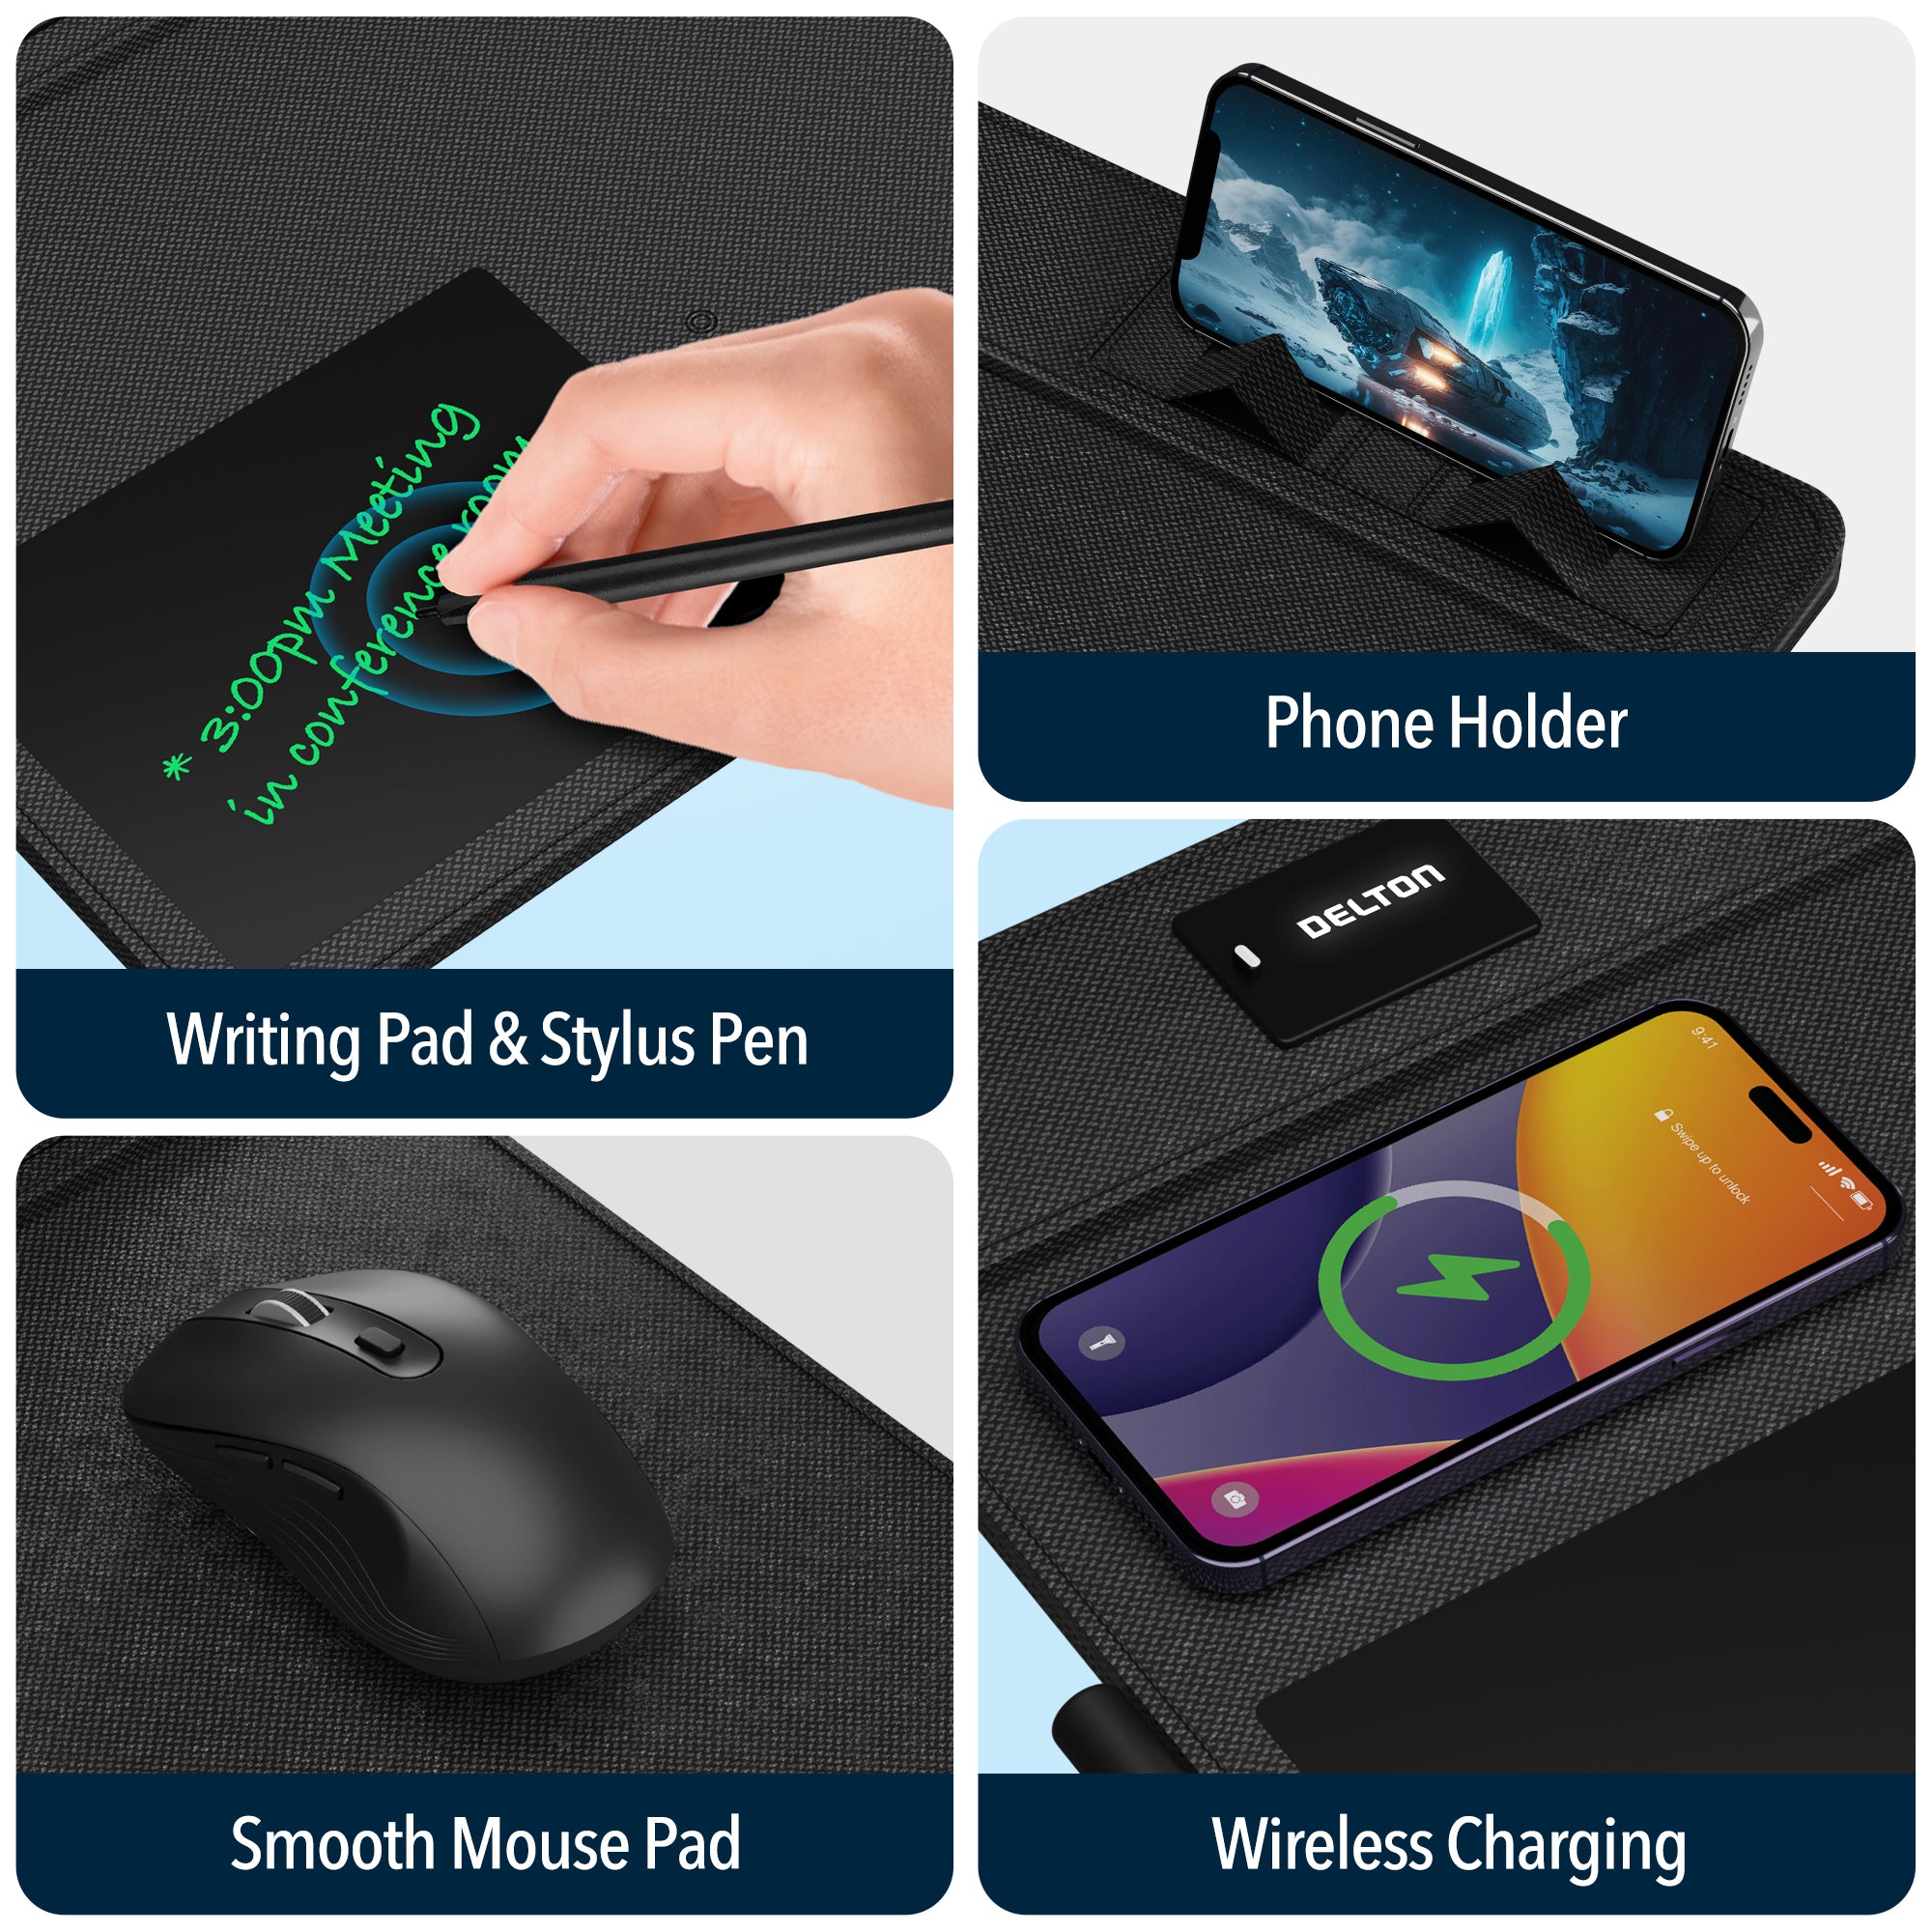 Delton S8/D101 Wireless Mouse and Non-Skid Mouse Pad